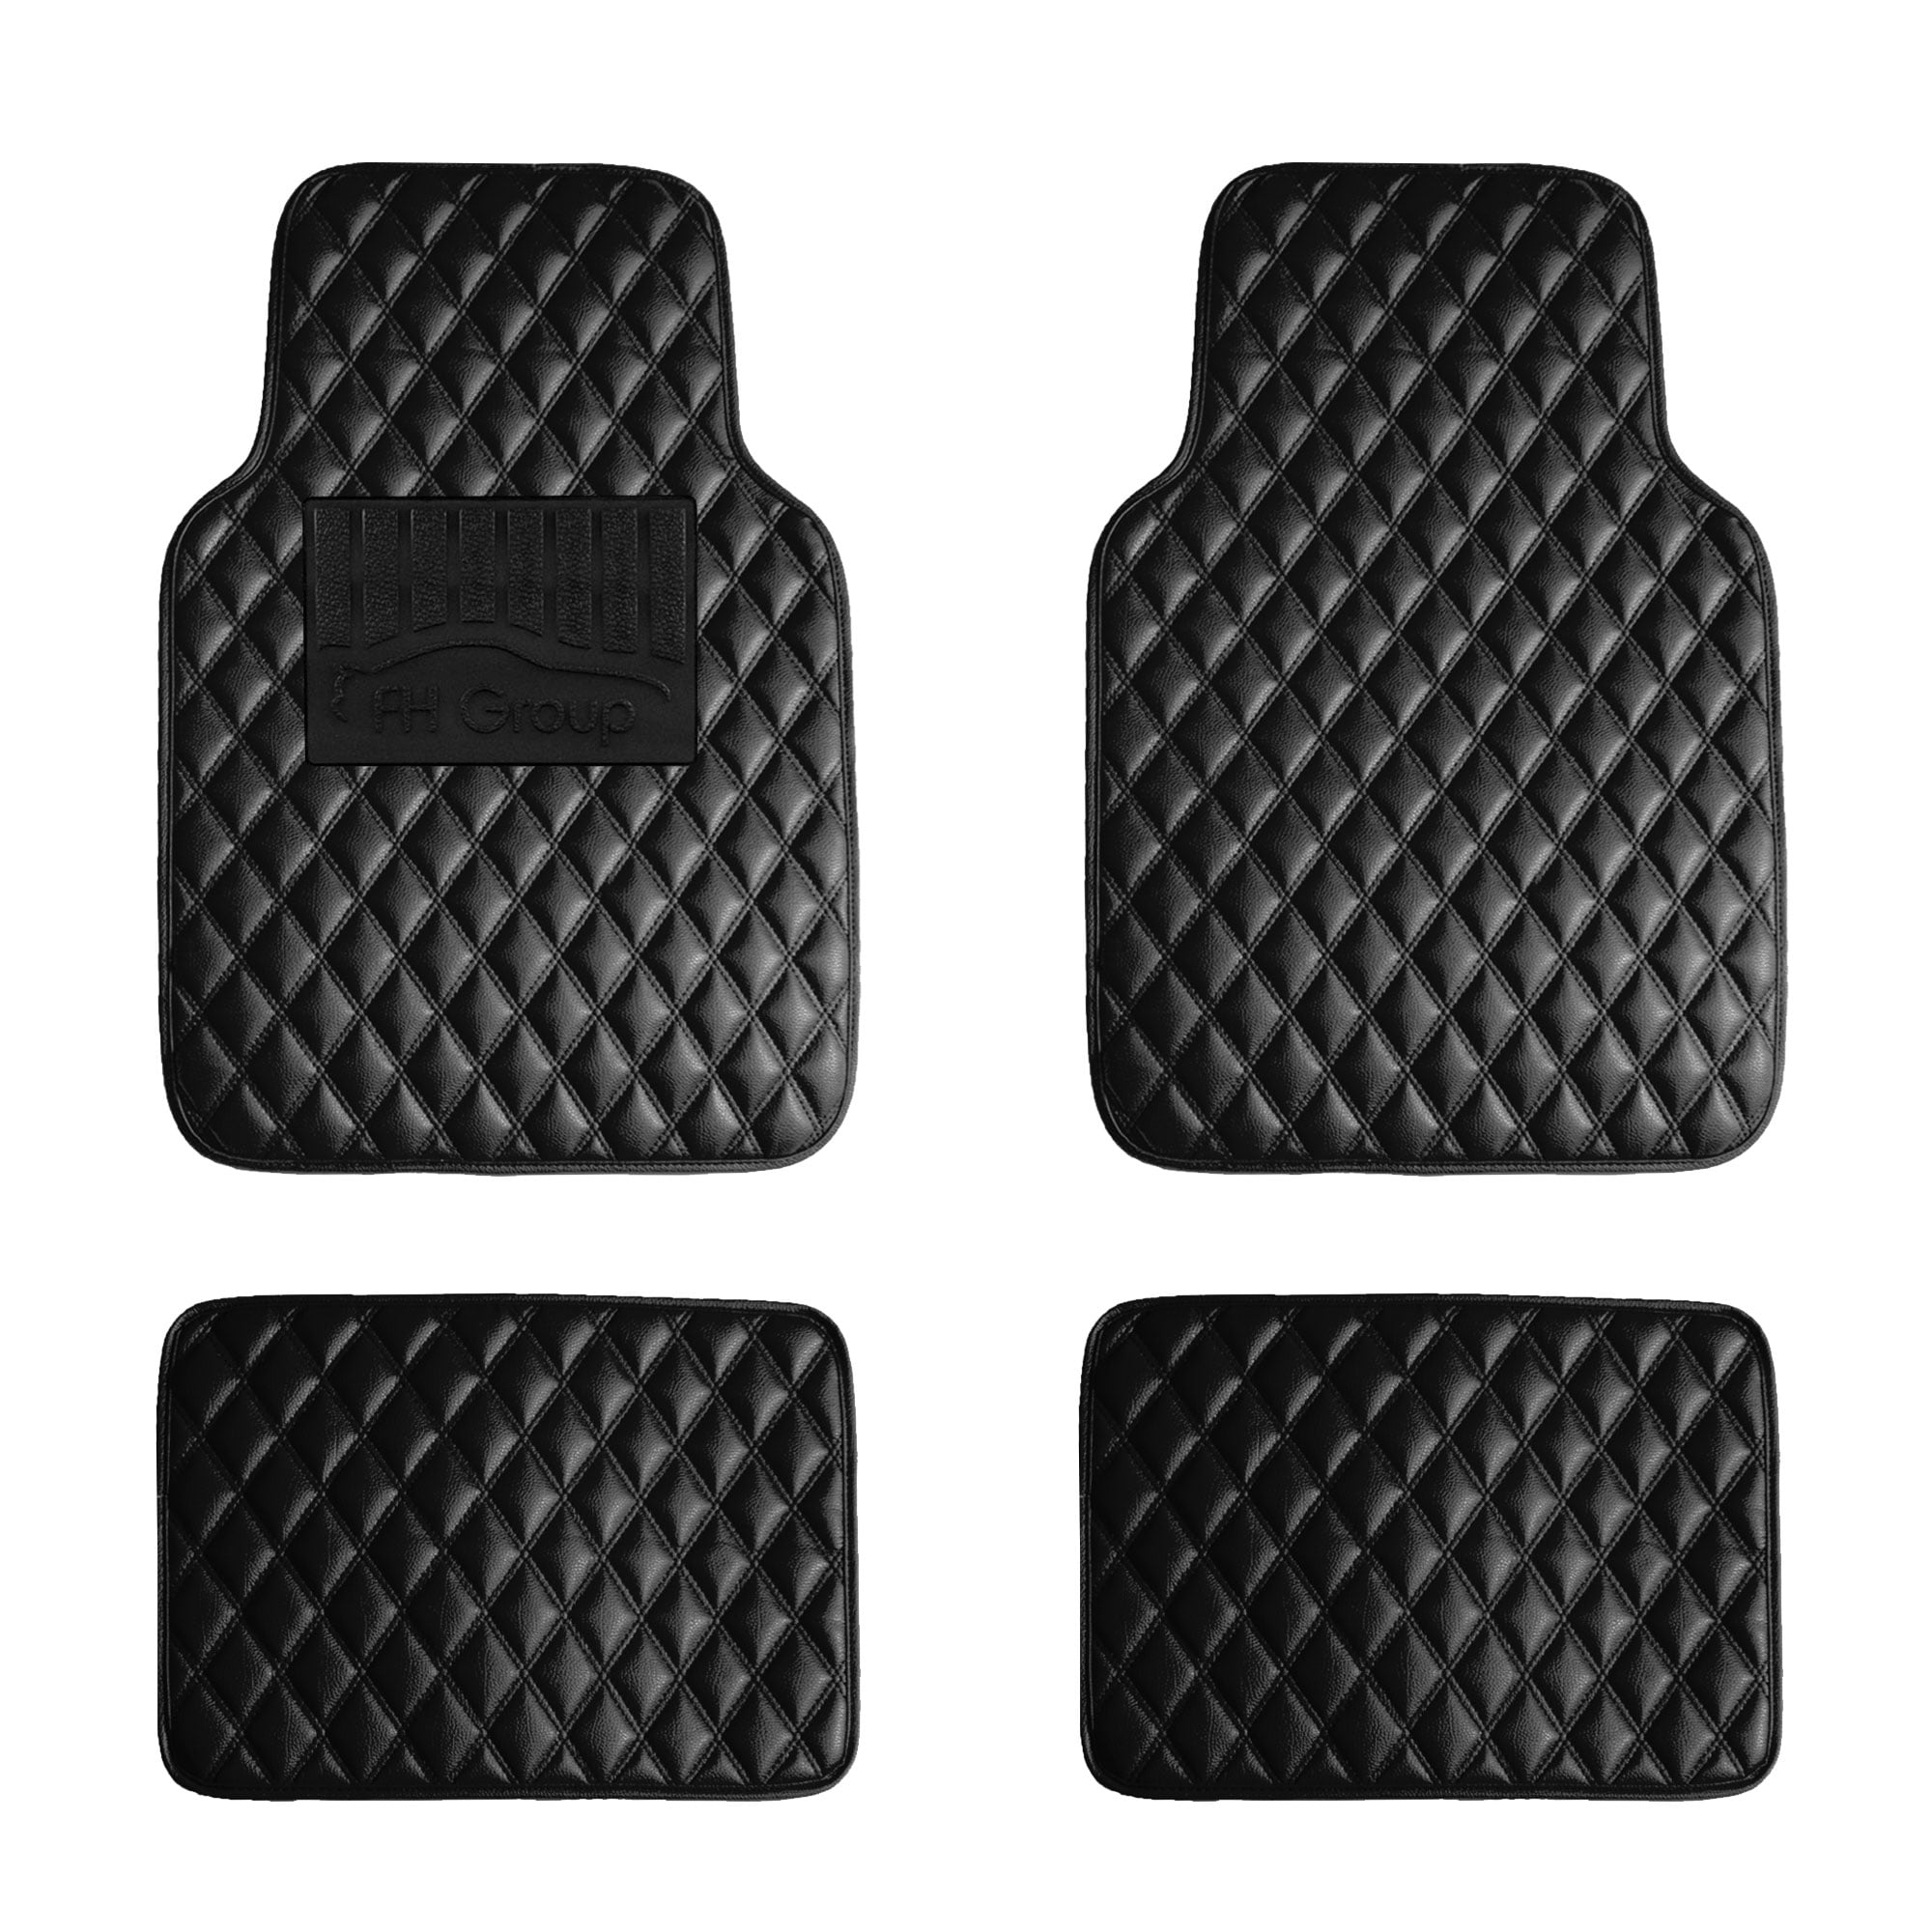  CAR Pass Luxury Faux Leather Universal Fit 3D Waterproof Car  Floor Mats, Super Anti-Slip saft for Suvs,Vans,Trucks,Pack of 4,Durable,All  Weather,Easy Clean (Black with Red, Medium Size) : Automotive